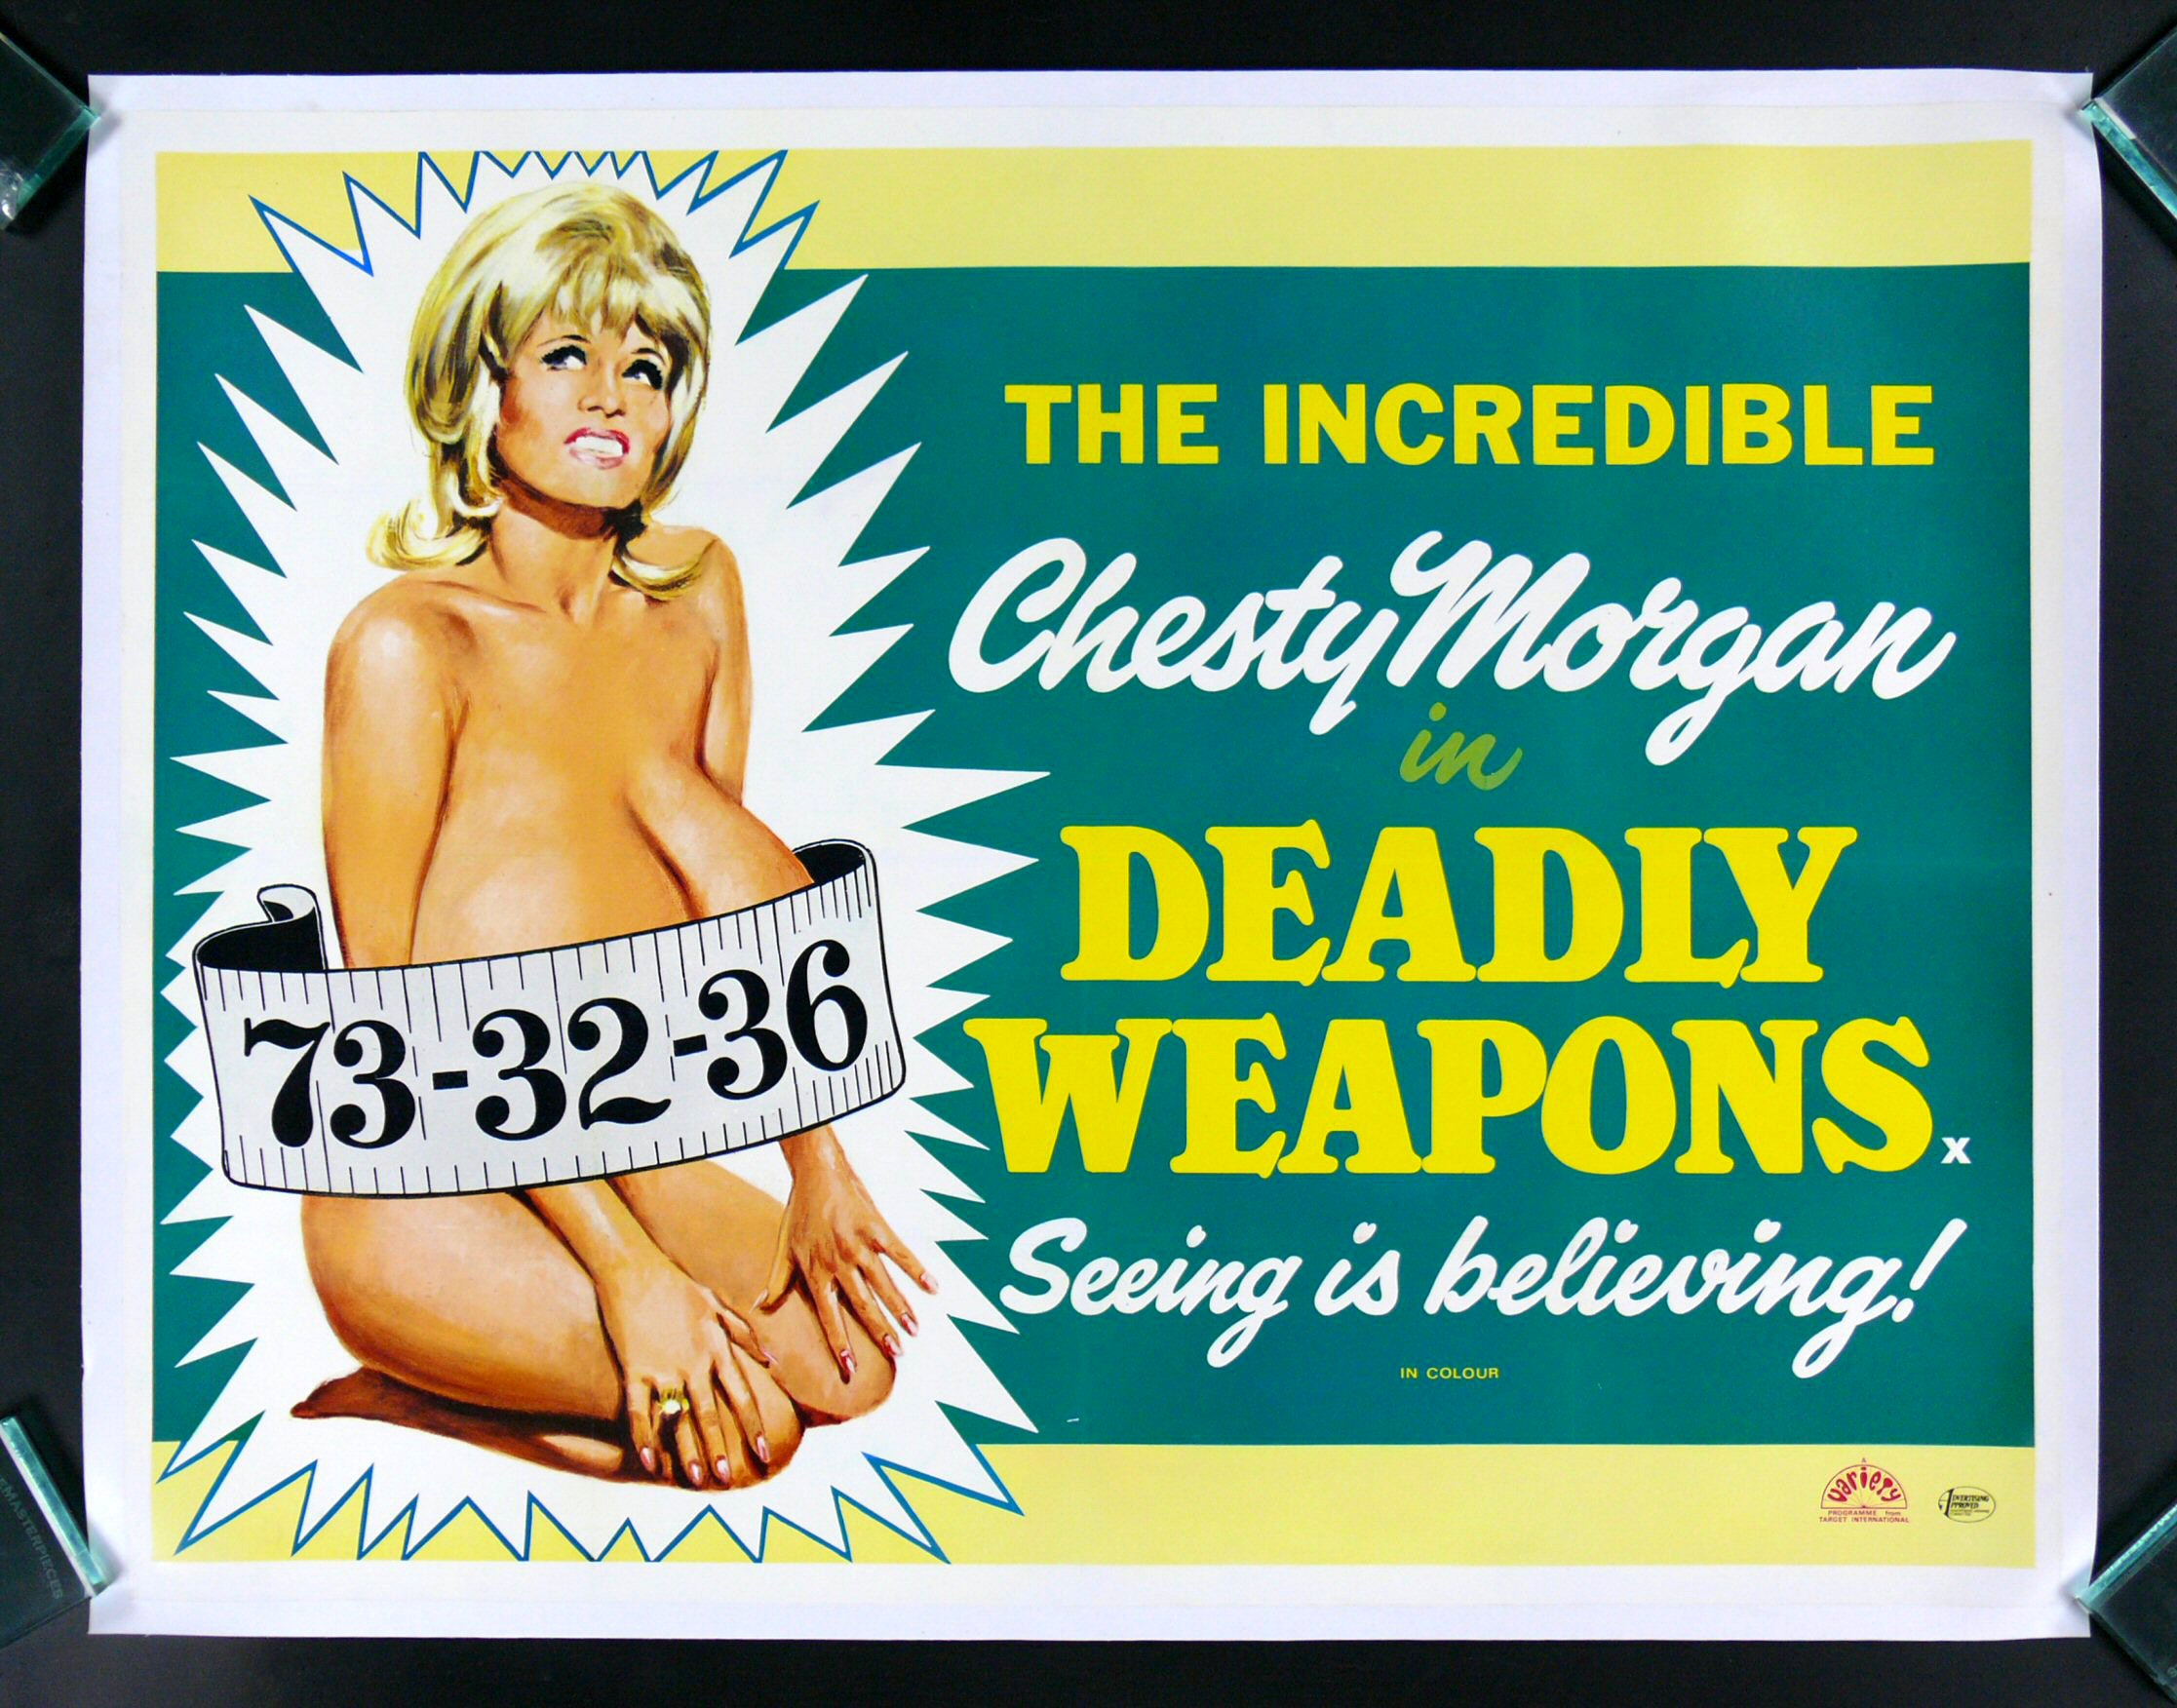 poster - The Incredible z Chesty Morgan Deadly 733236 Weapons. Seeing is believing Ll es